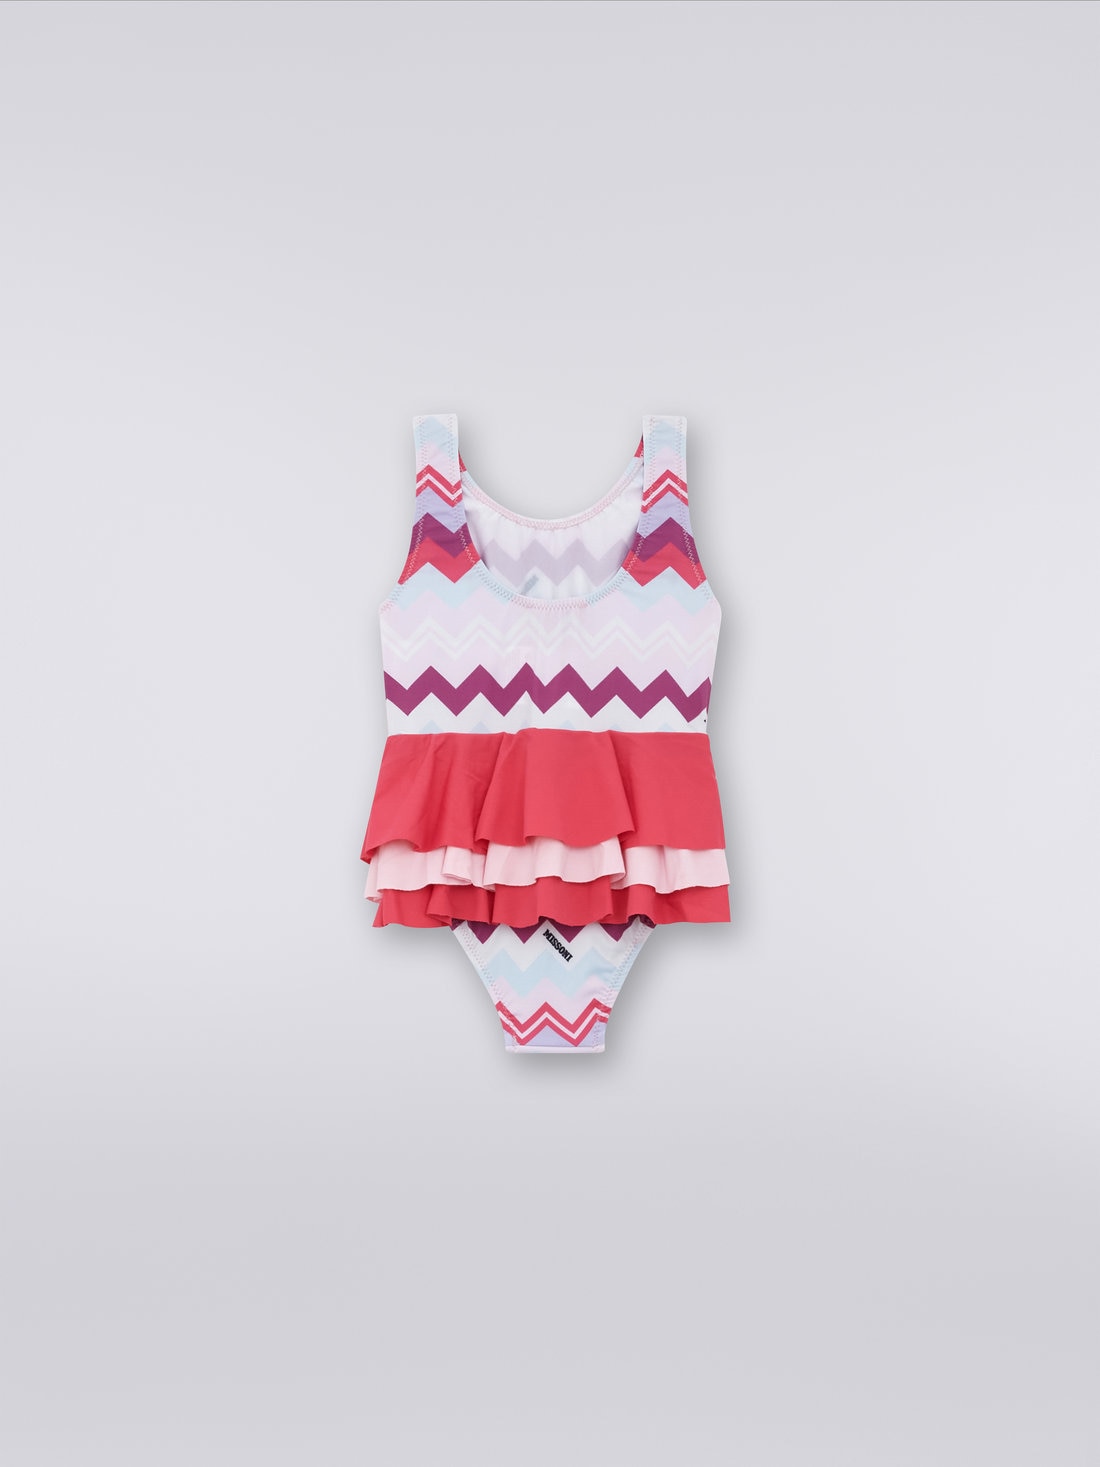 One-piece swimming costume with ruffle and zigzag pattern, Multicoloured  - KS23WP05BV00E0SM96I - 1